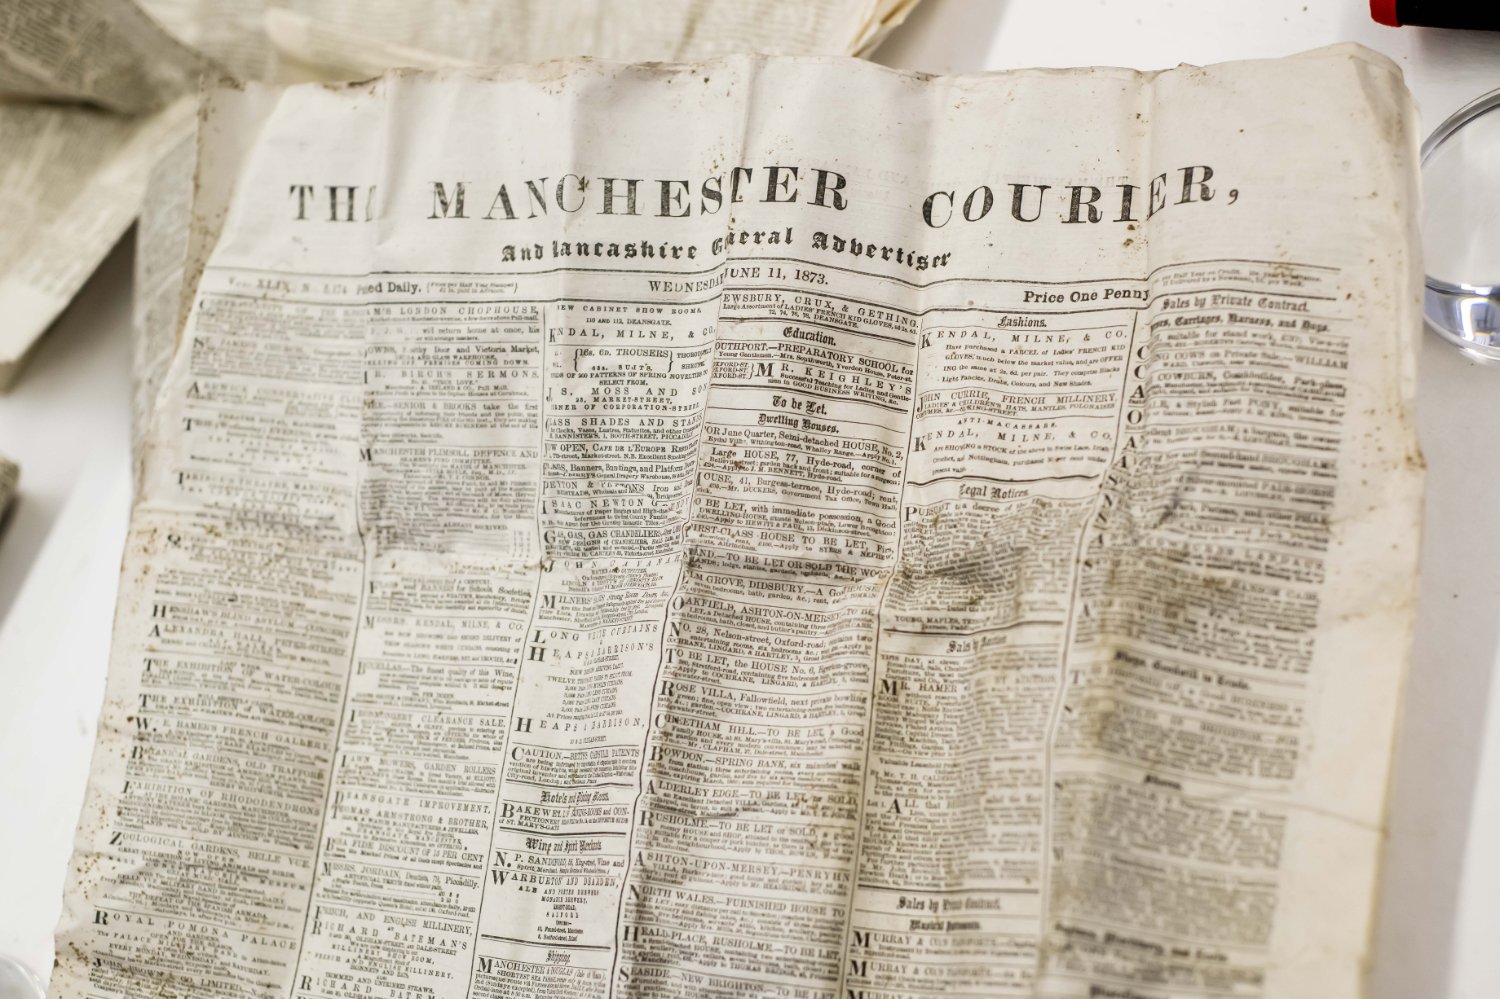 The Manchester Courier issue from 11-6-1873 found in the time capsule, credit Chris Payne 2023 SML.jpg